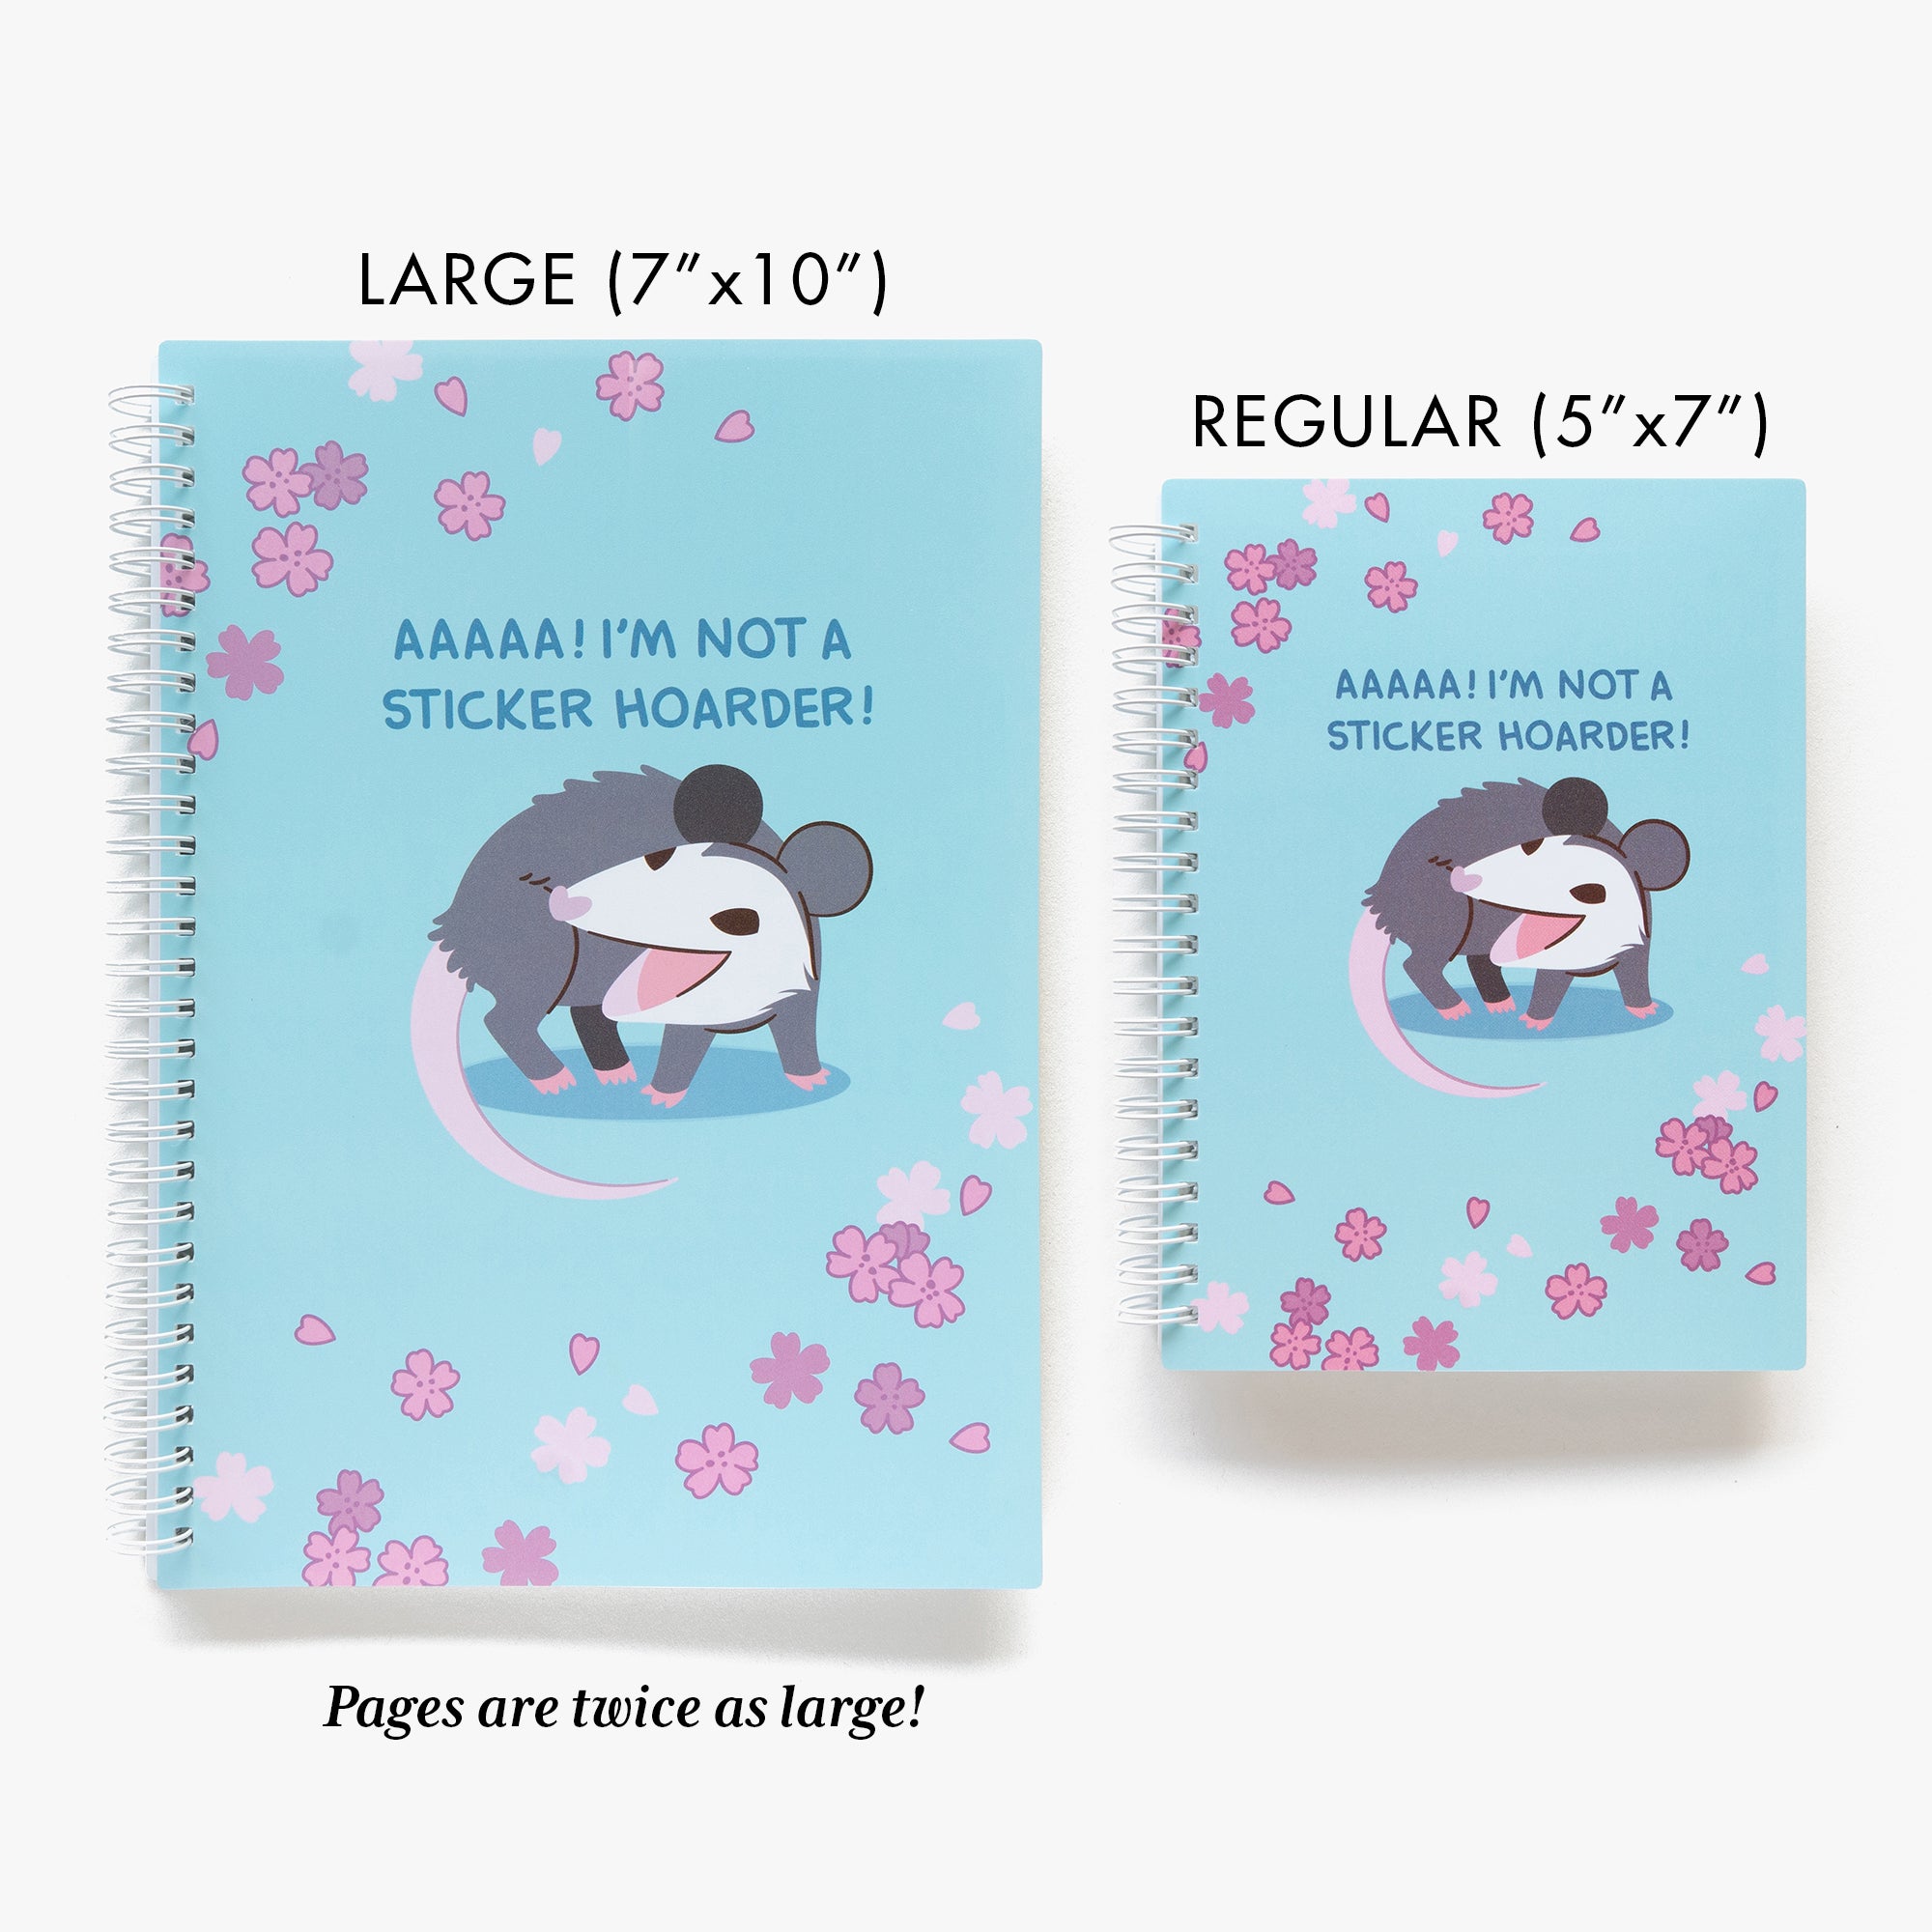 Spooky and Cherry Possum Reusable Sticker Books are restocked! Not